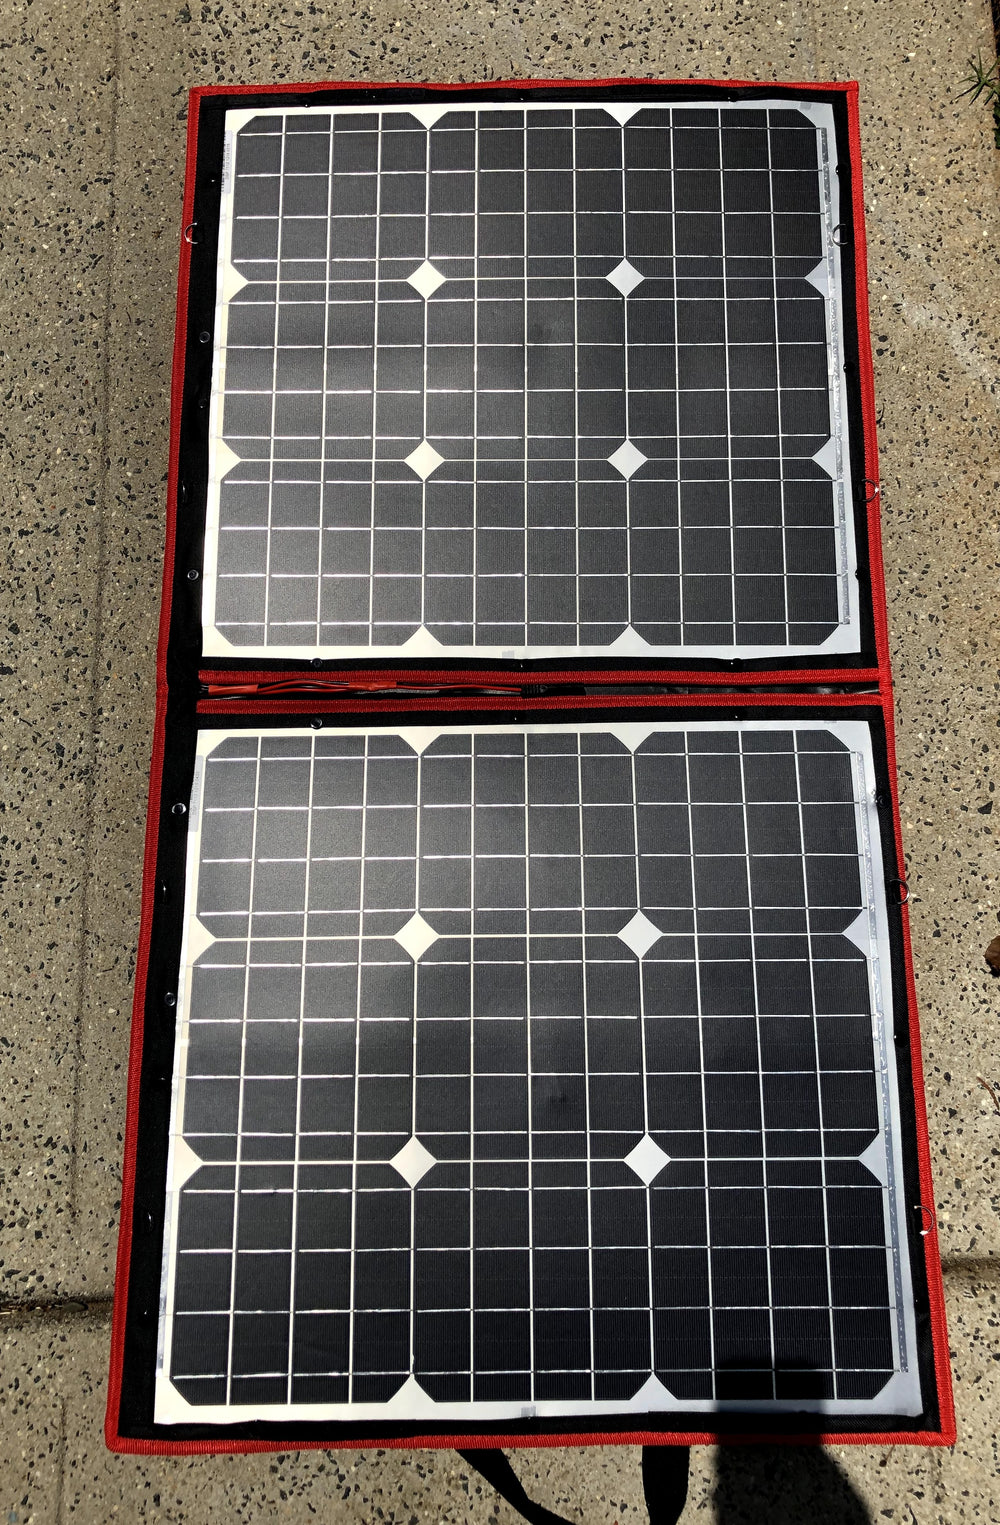 Dokio 100W 18V PORTABLE FOLDABLE Solar Panel Kit (21x28inch, 5.9lb) Monocrystalline(HIGH Efficiency) with CONTROLLER 2 USB Output to Charge 12V Batteries (All Types: Vented AGM Gel) RV Camper Boat - NOS